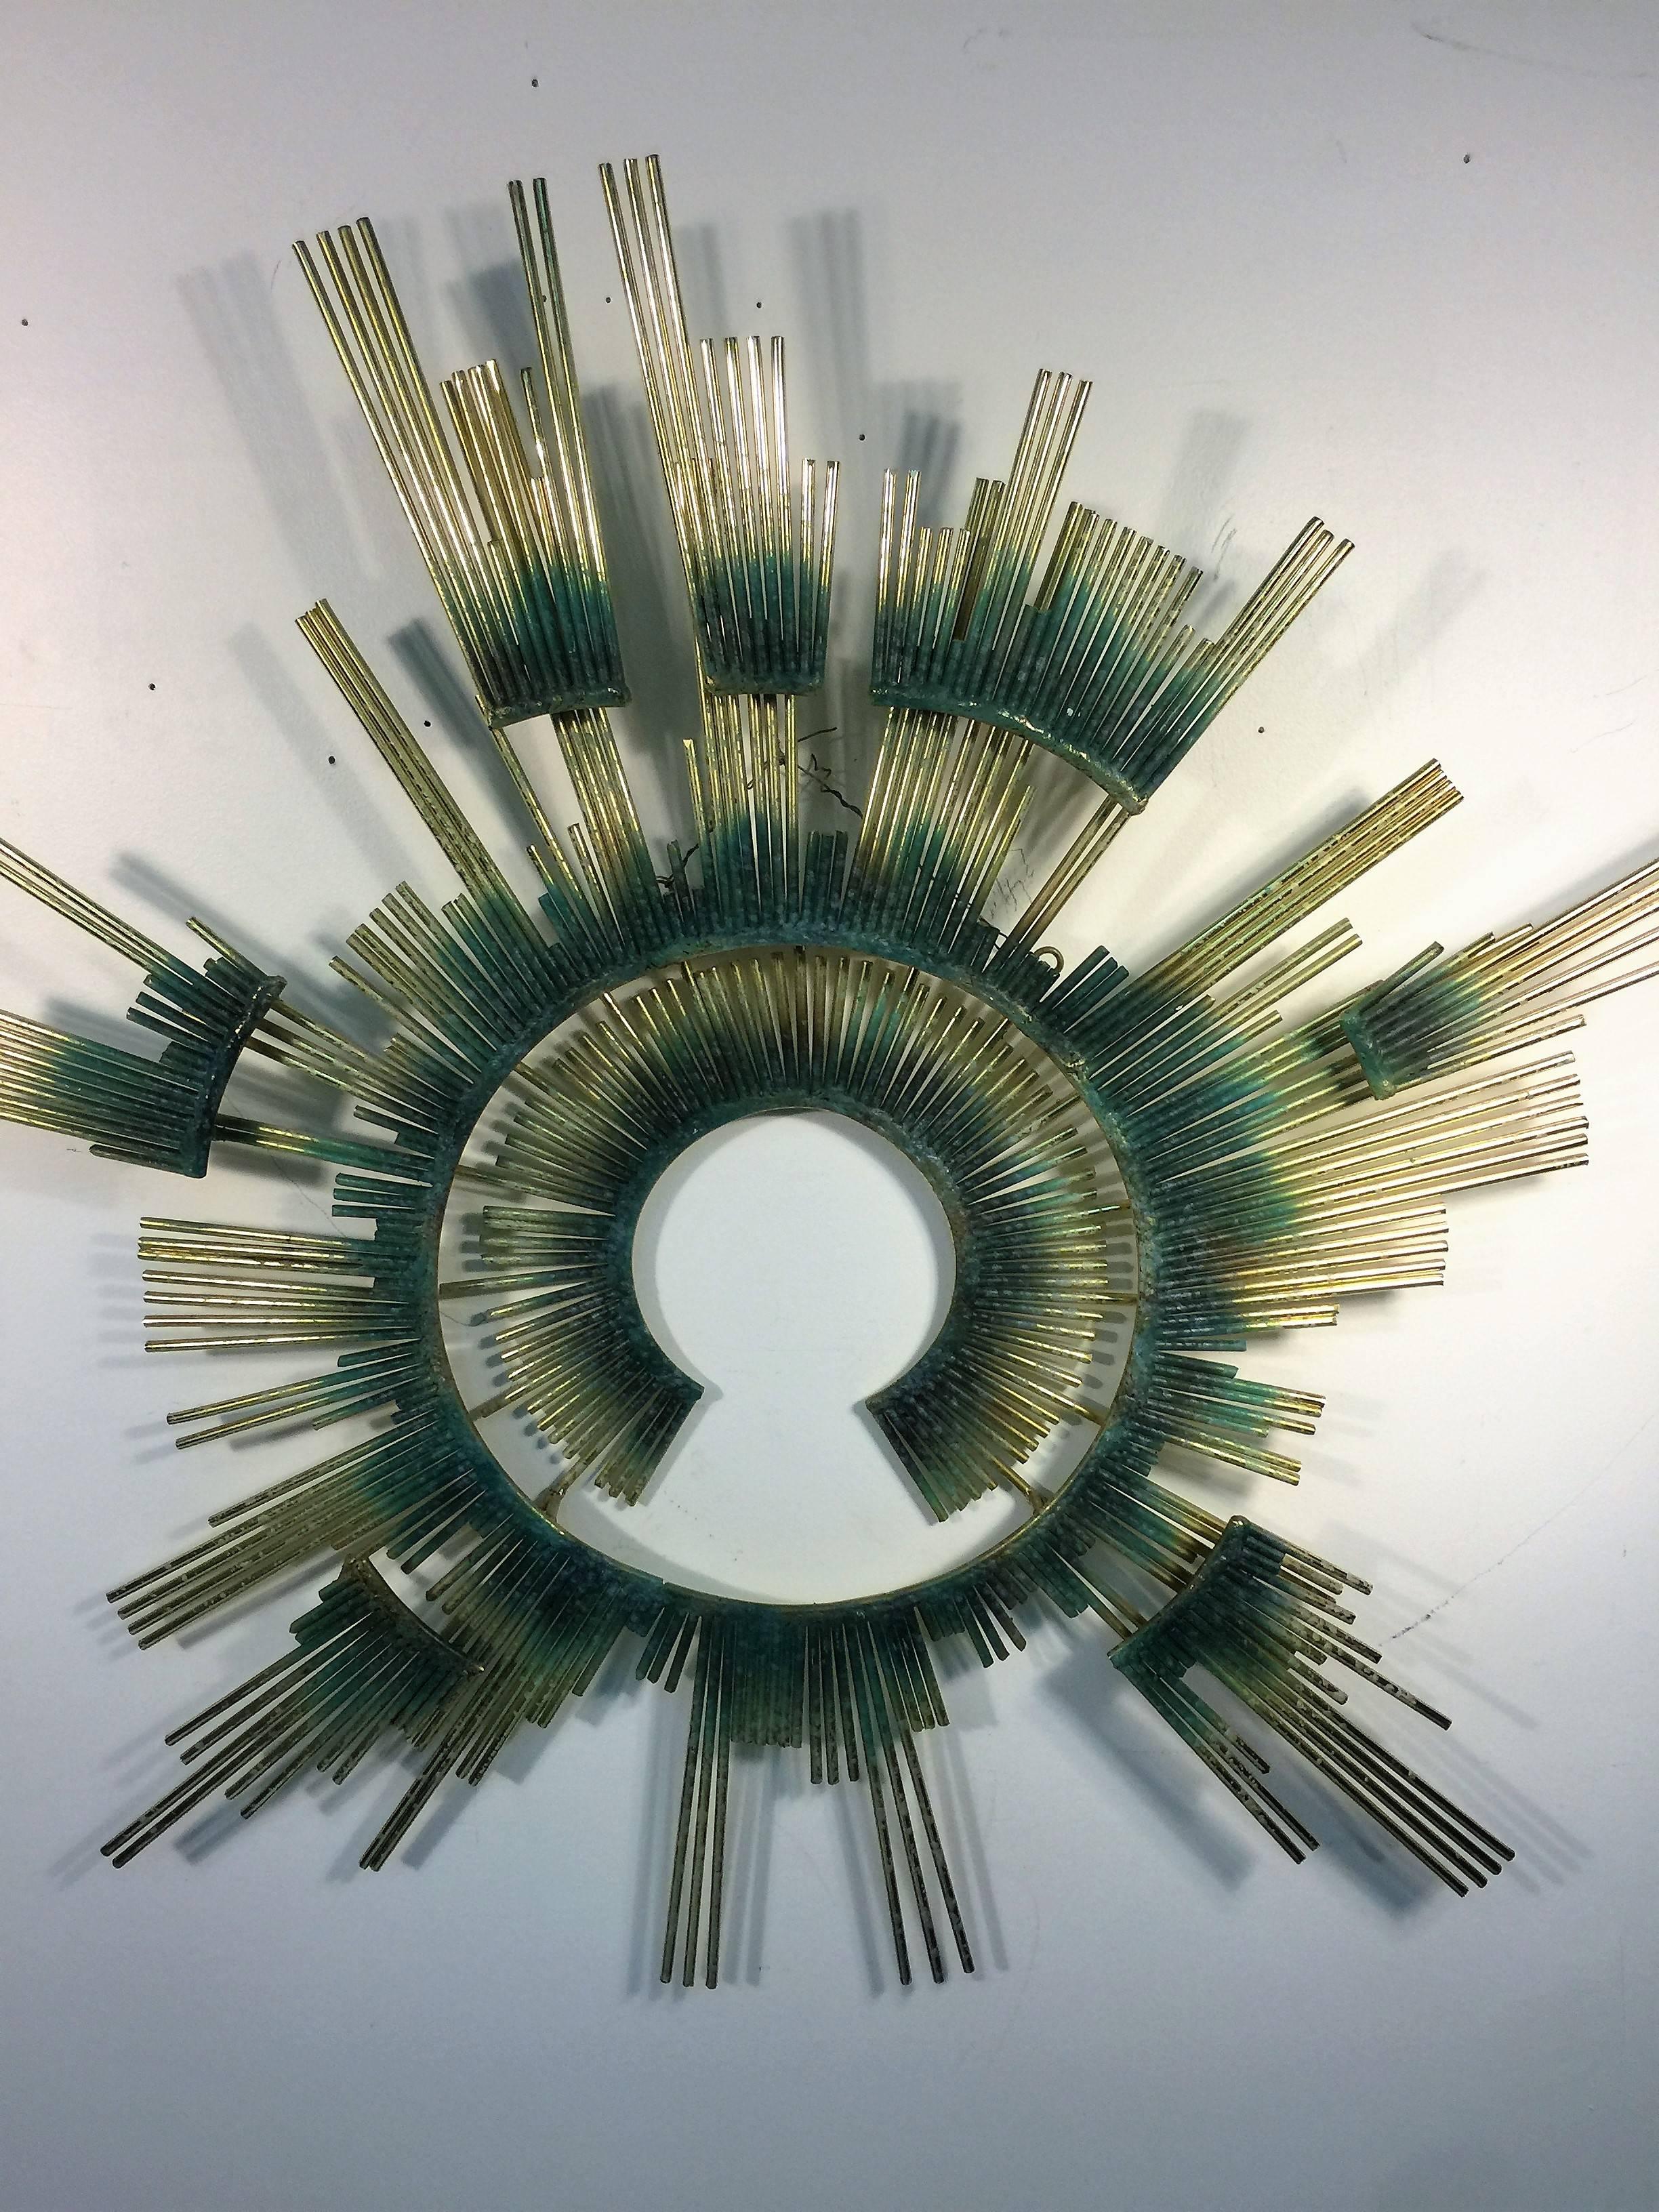 Exceptional and well constructed sunburst wall sculpture signed C Jere 1987.
With many hooks to hang this is a great modern wall sculpture that would create depth and drama to your interior.